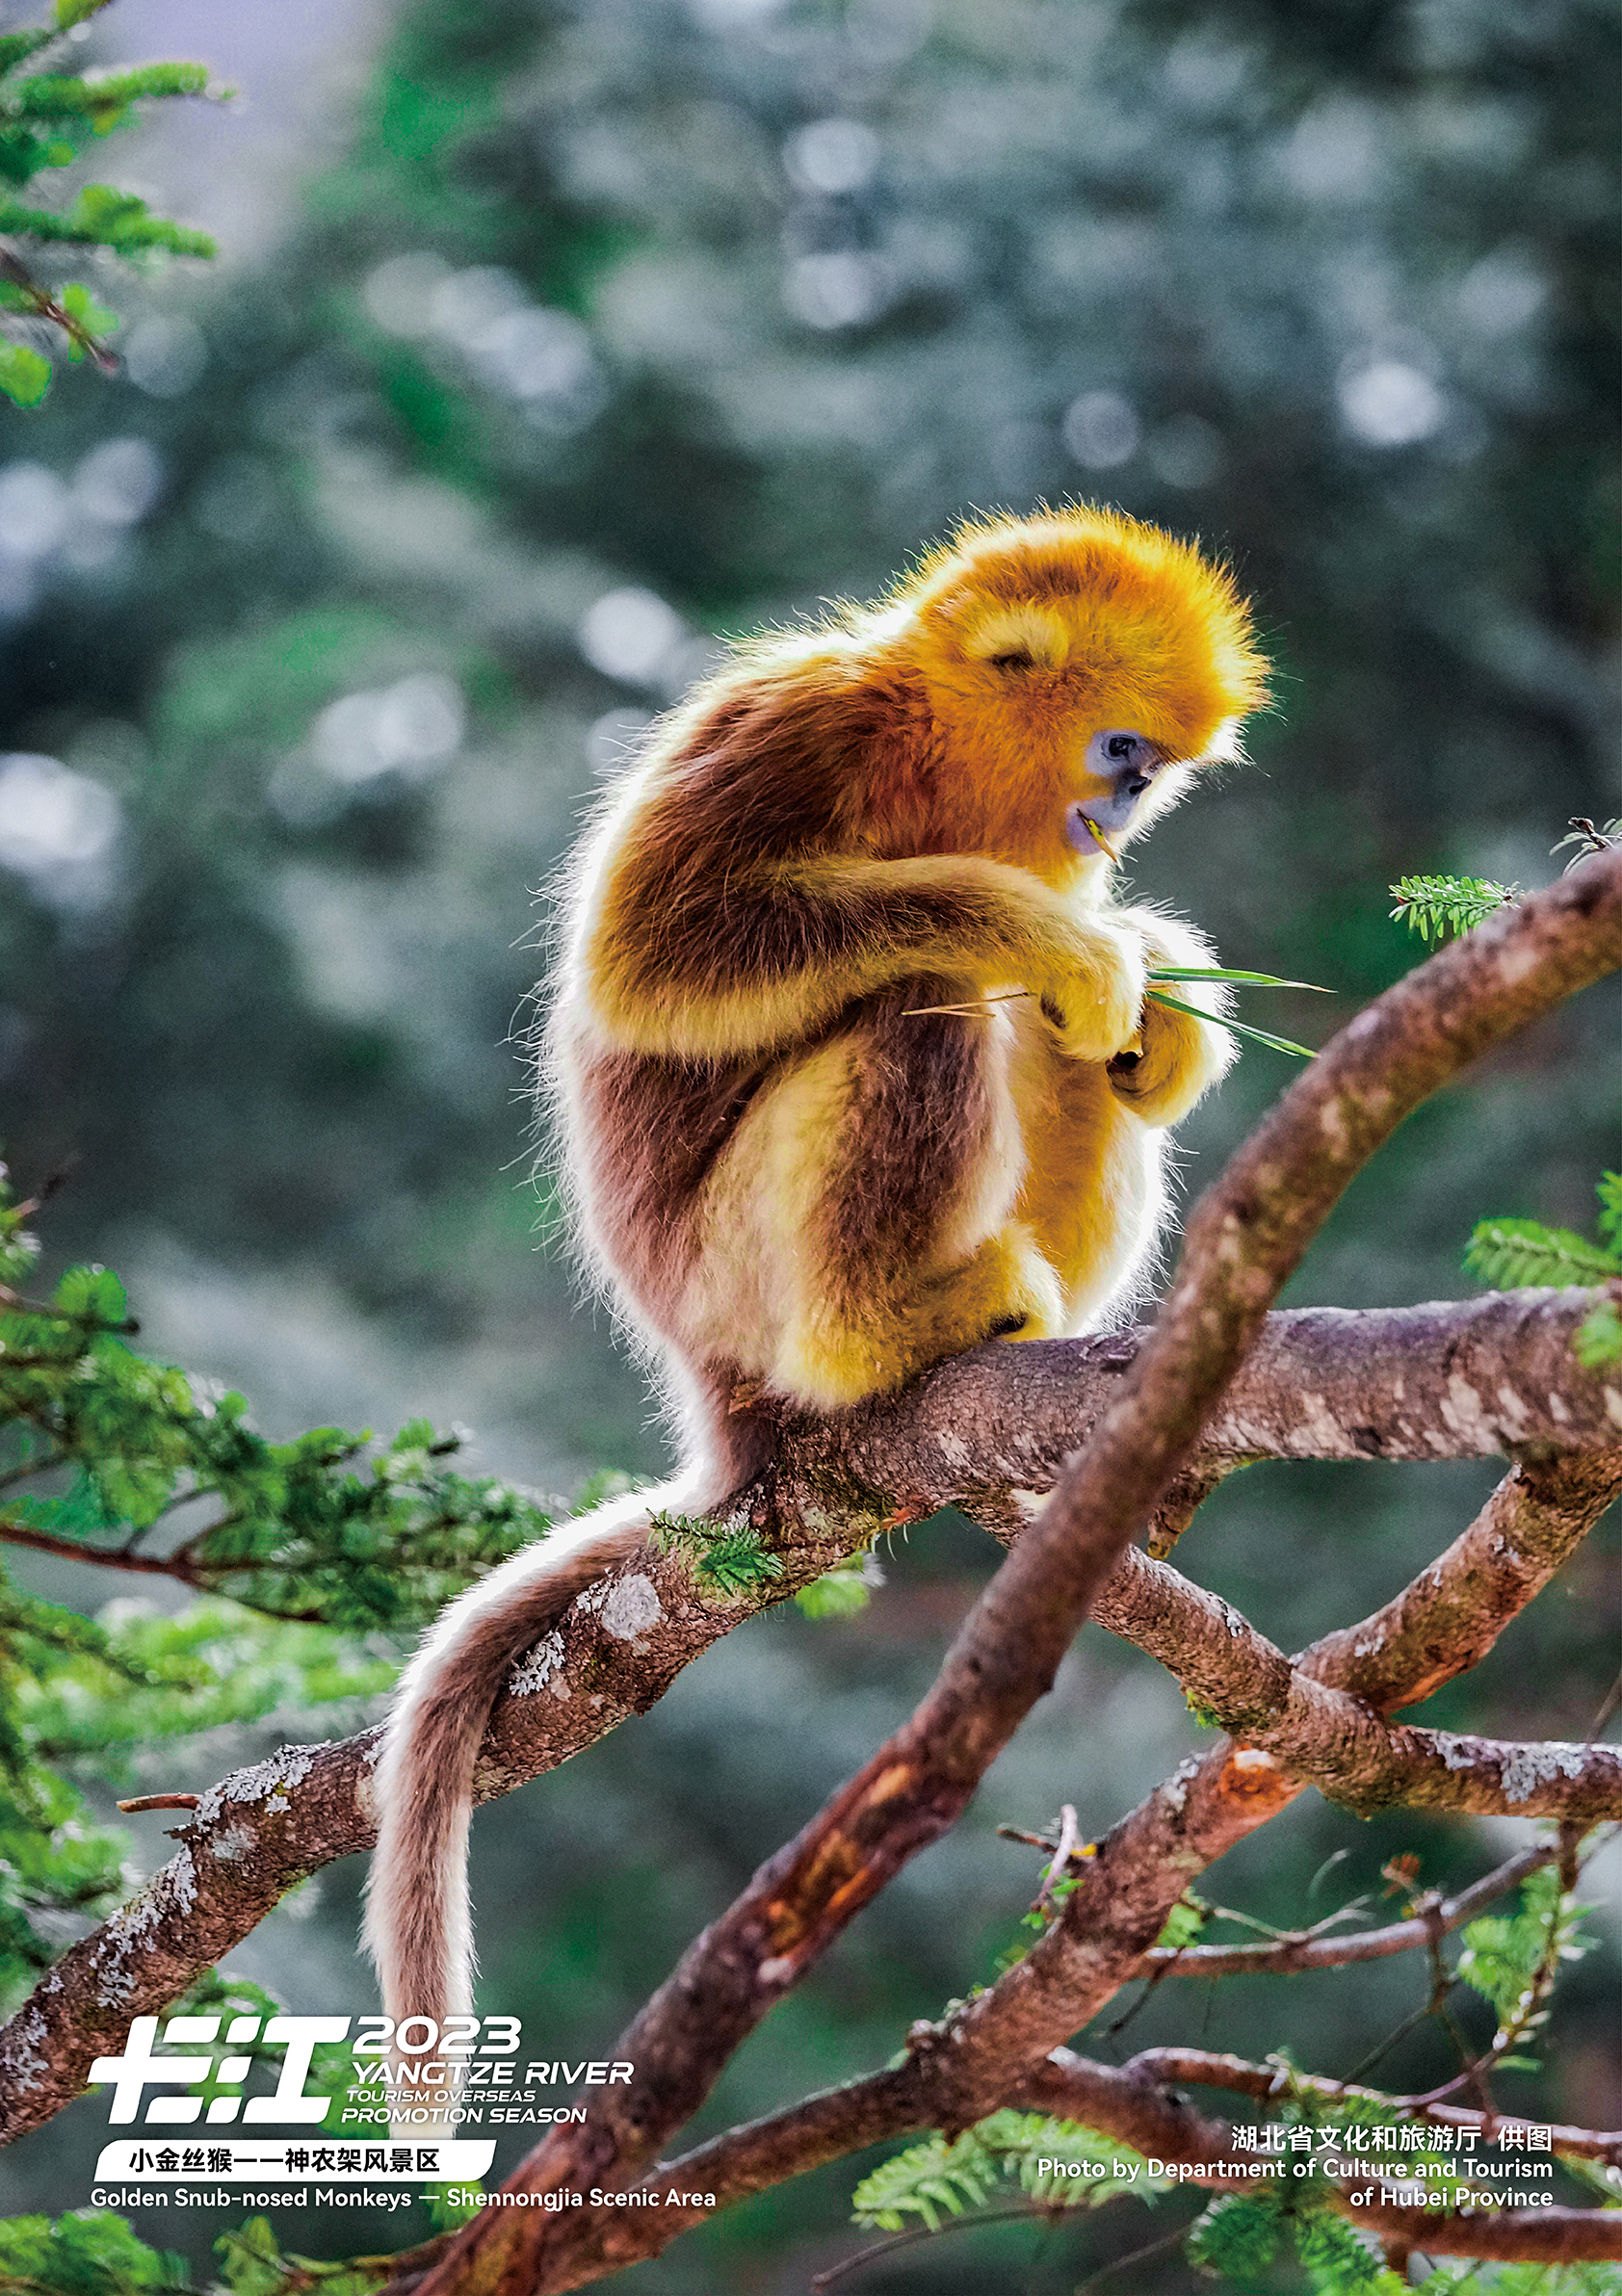 This undated photo shows a golden snub-nosed monkey perching on a tree branch in Shennongjia Scenic Area in central China's Hubei Province. /Photo provided to CGTN